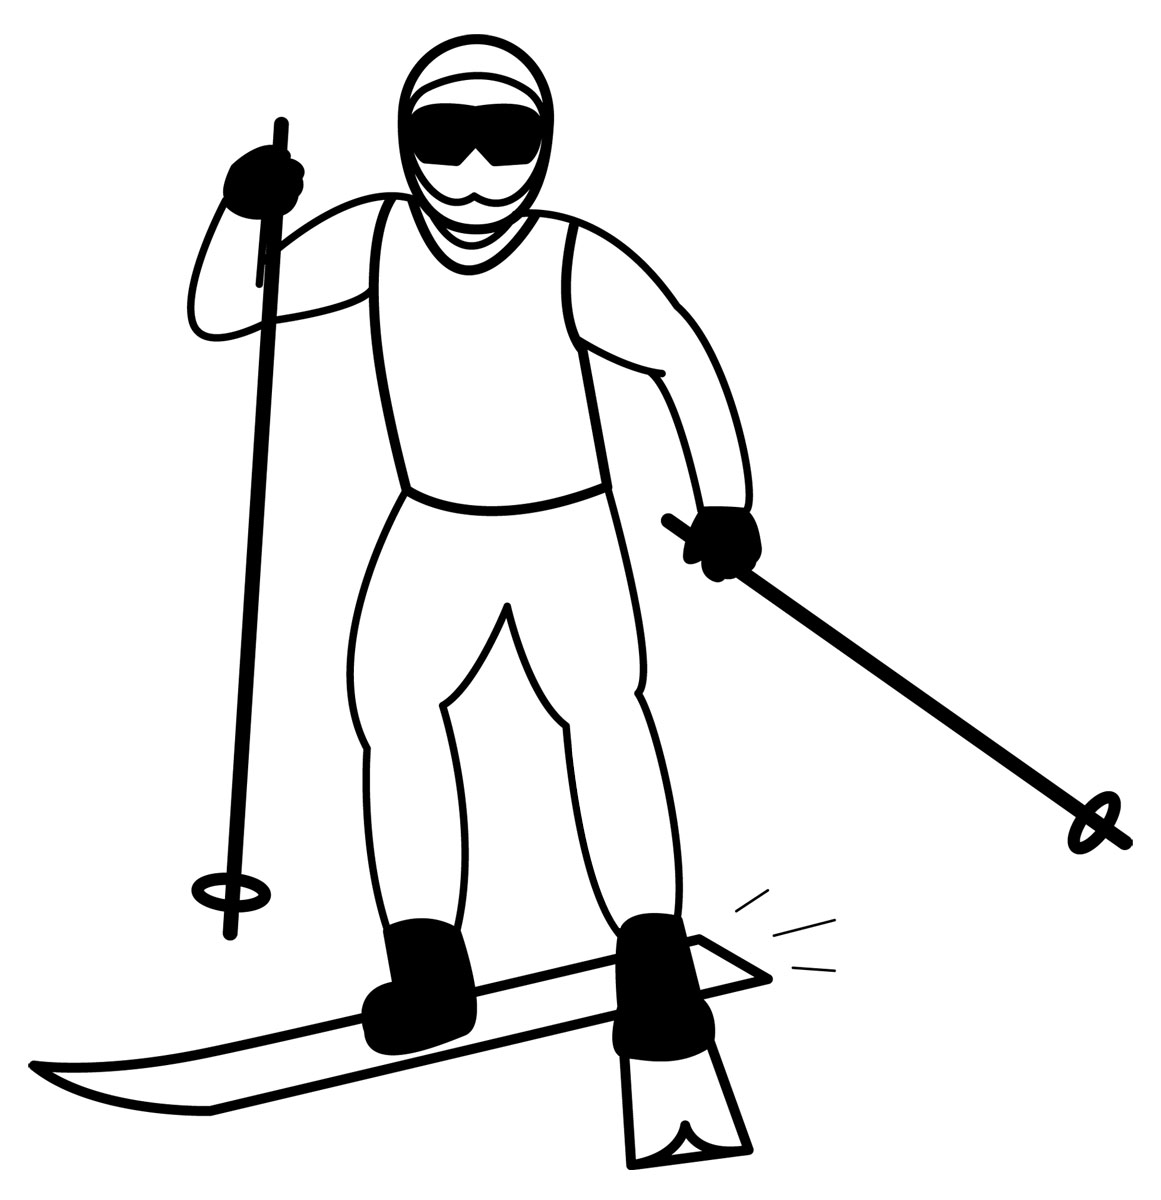 Cross Country Skier Clip Art In Black And White  An Illustration Of A